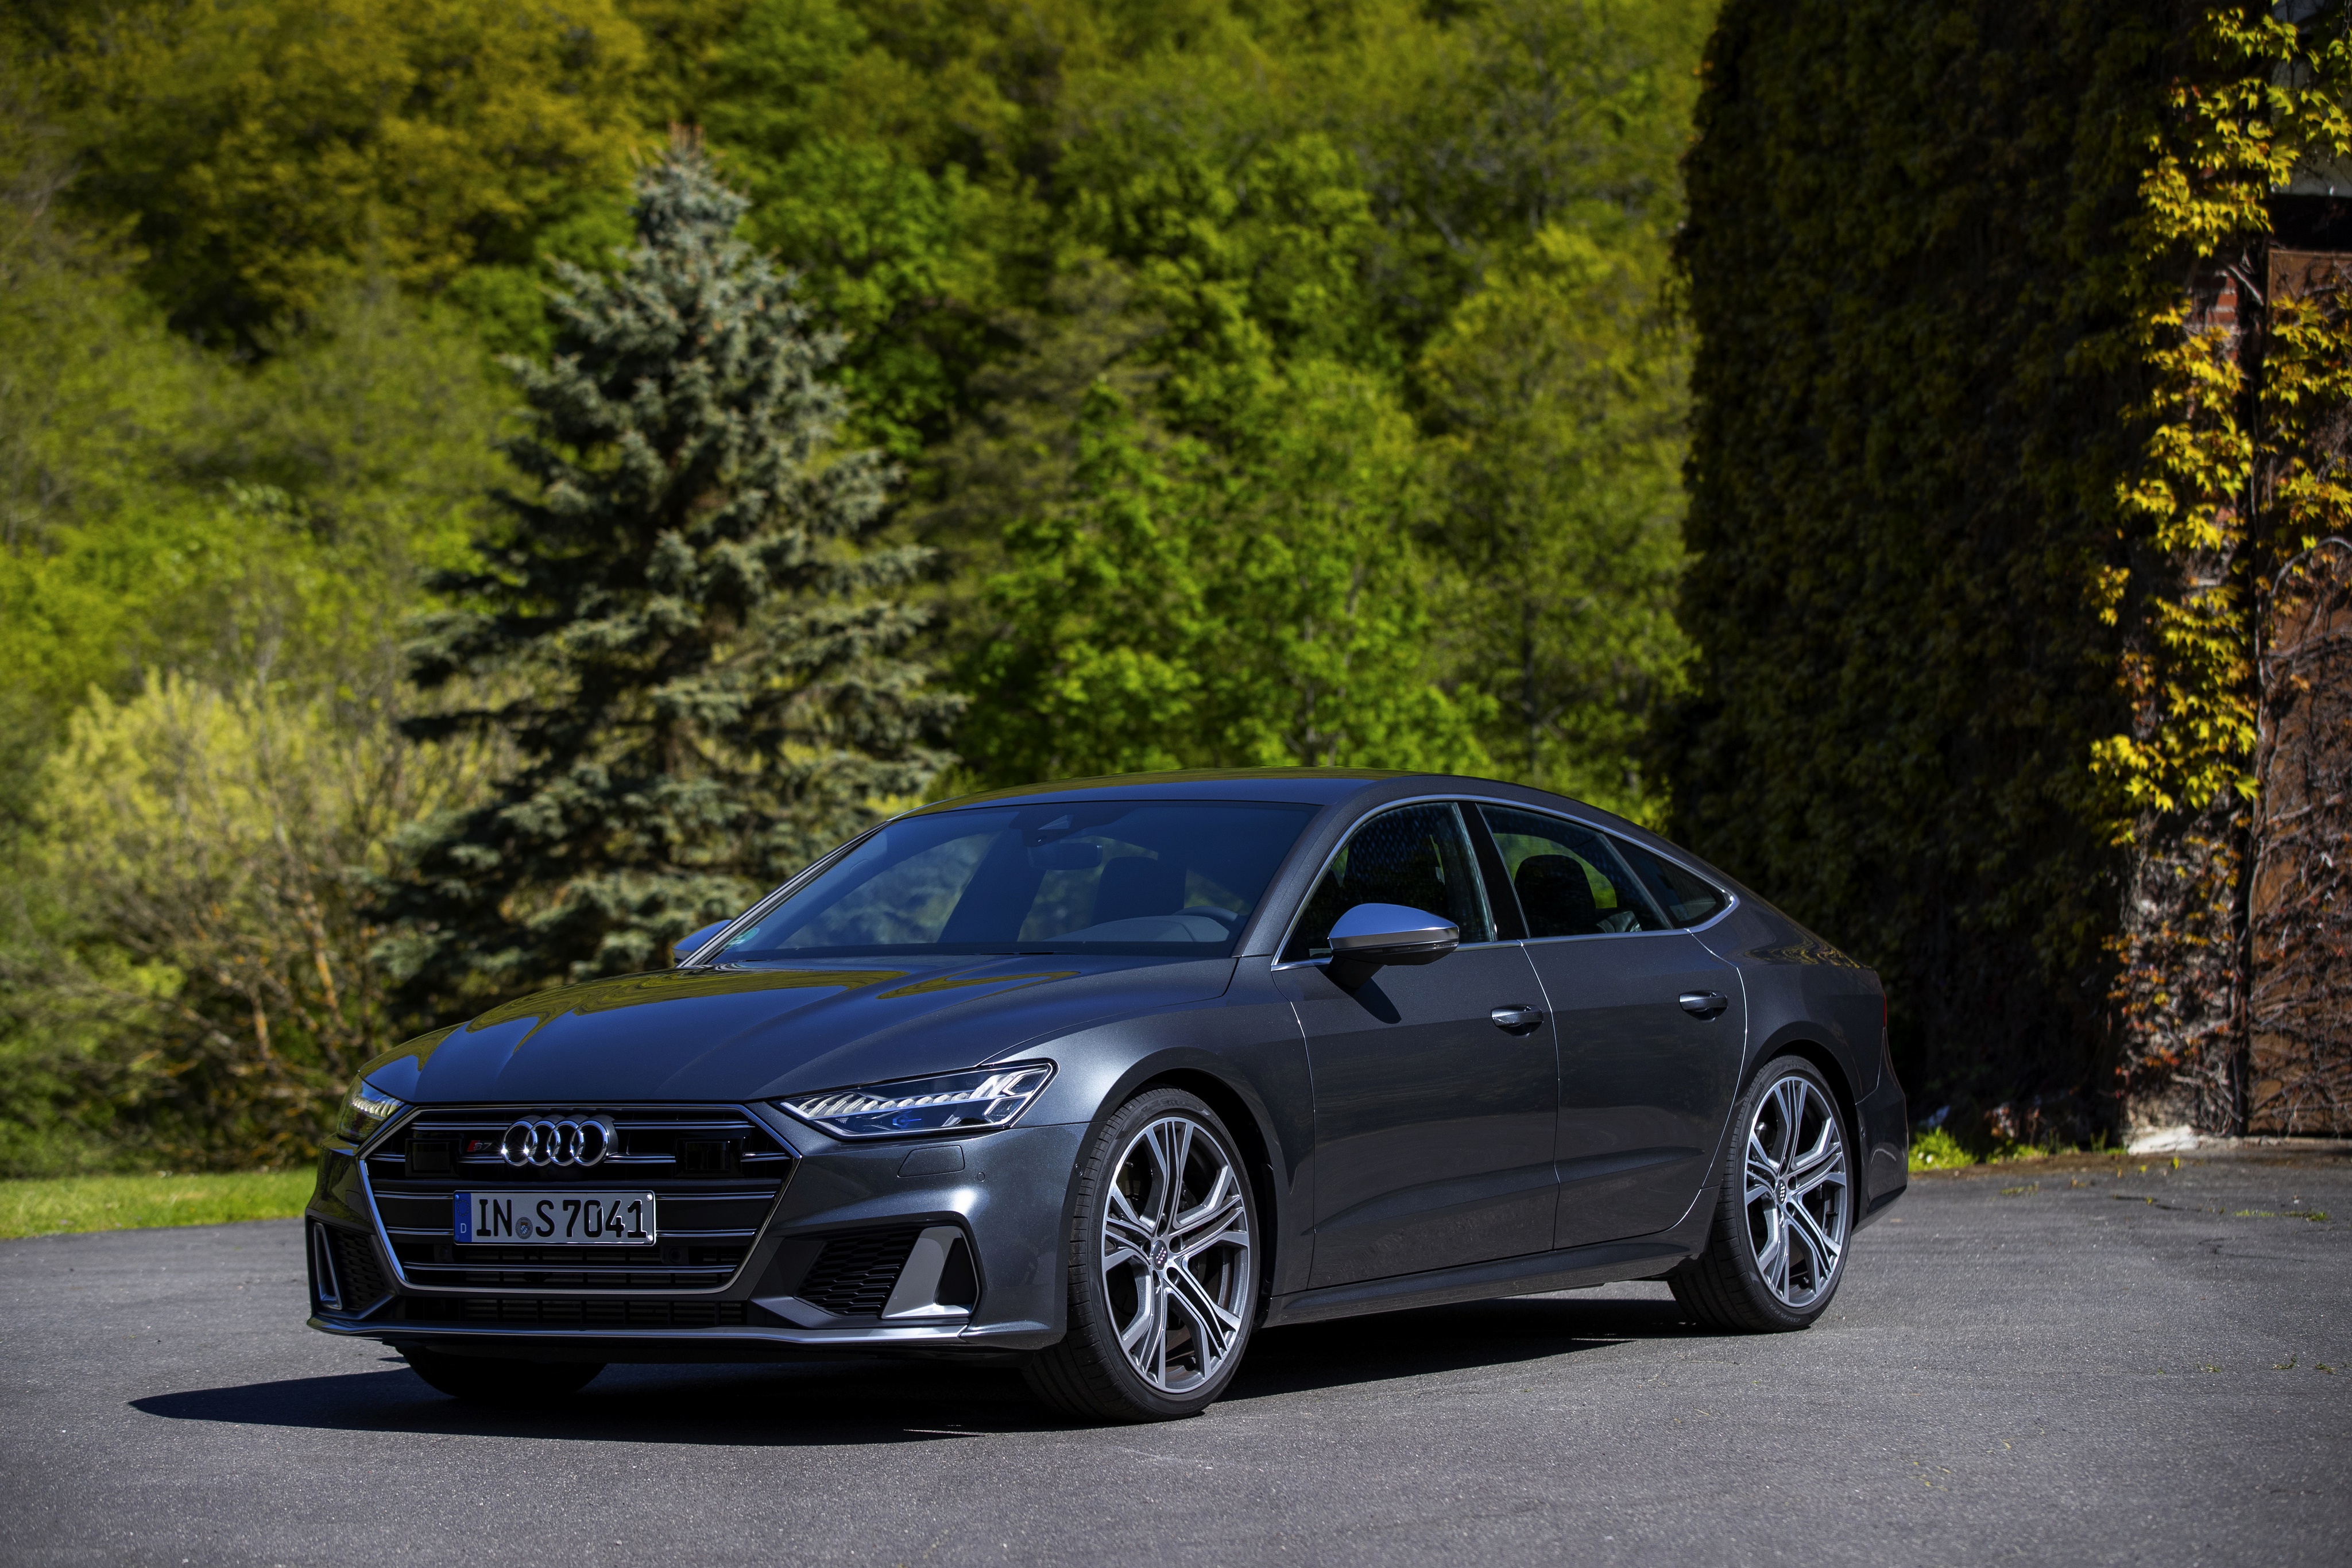 Vehicles Audi A7 HD Wallpaper | Background Image